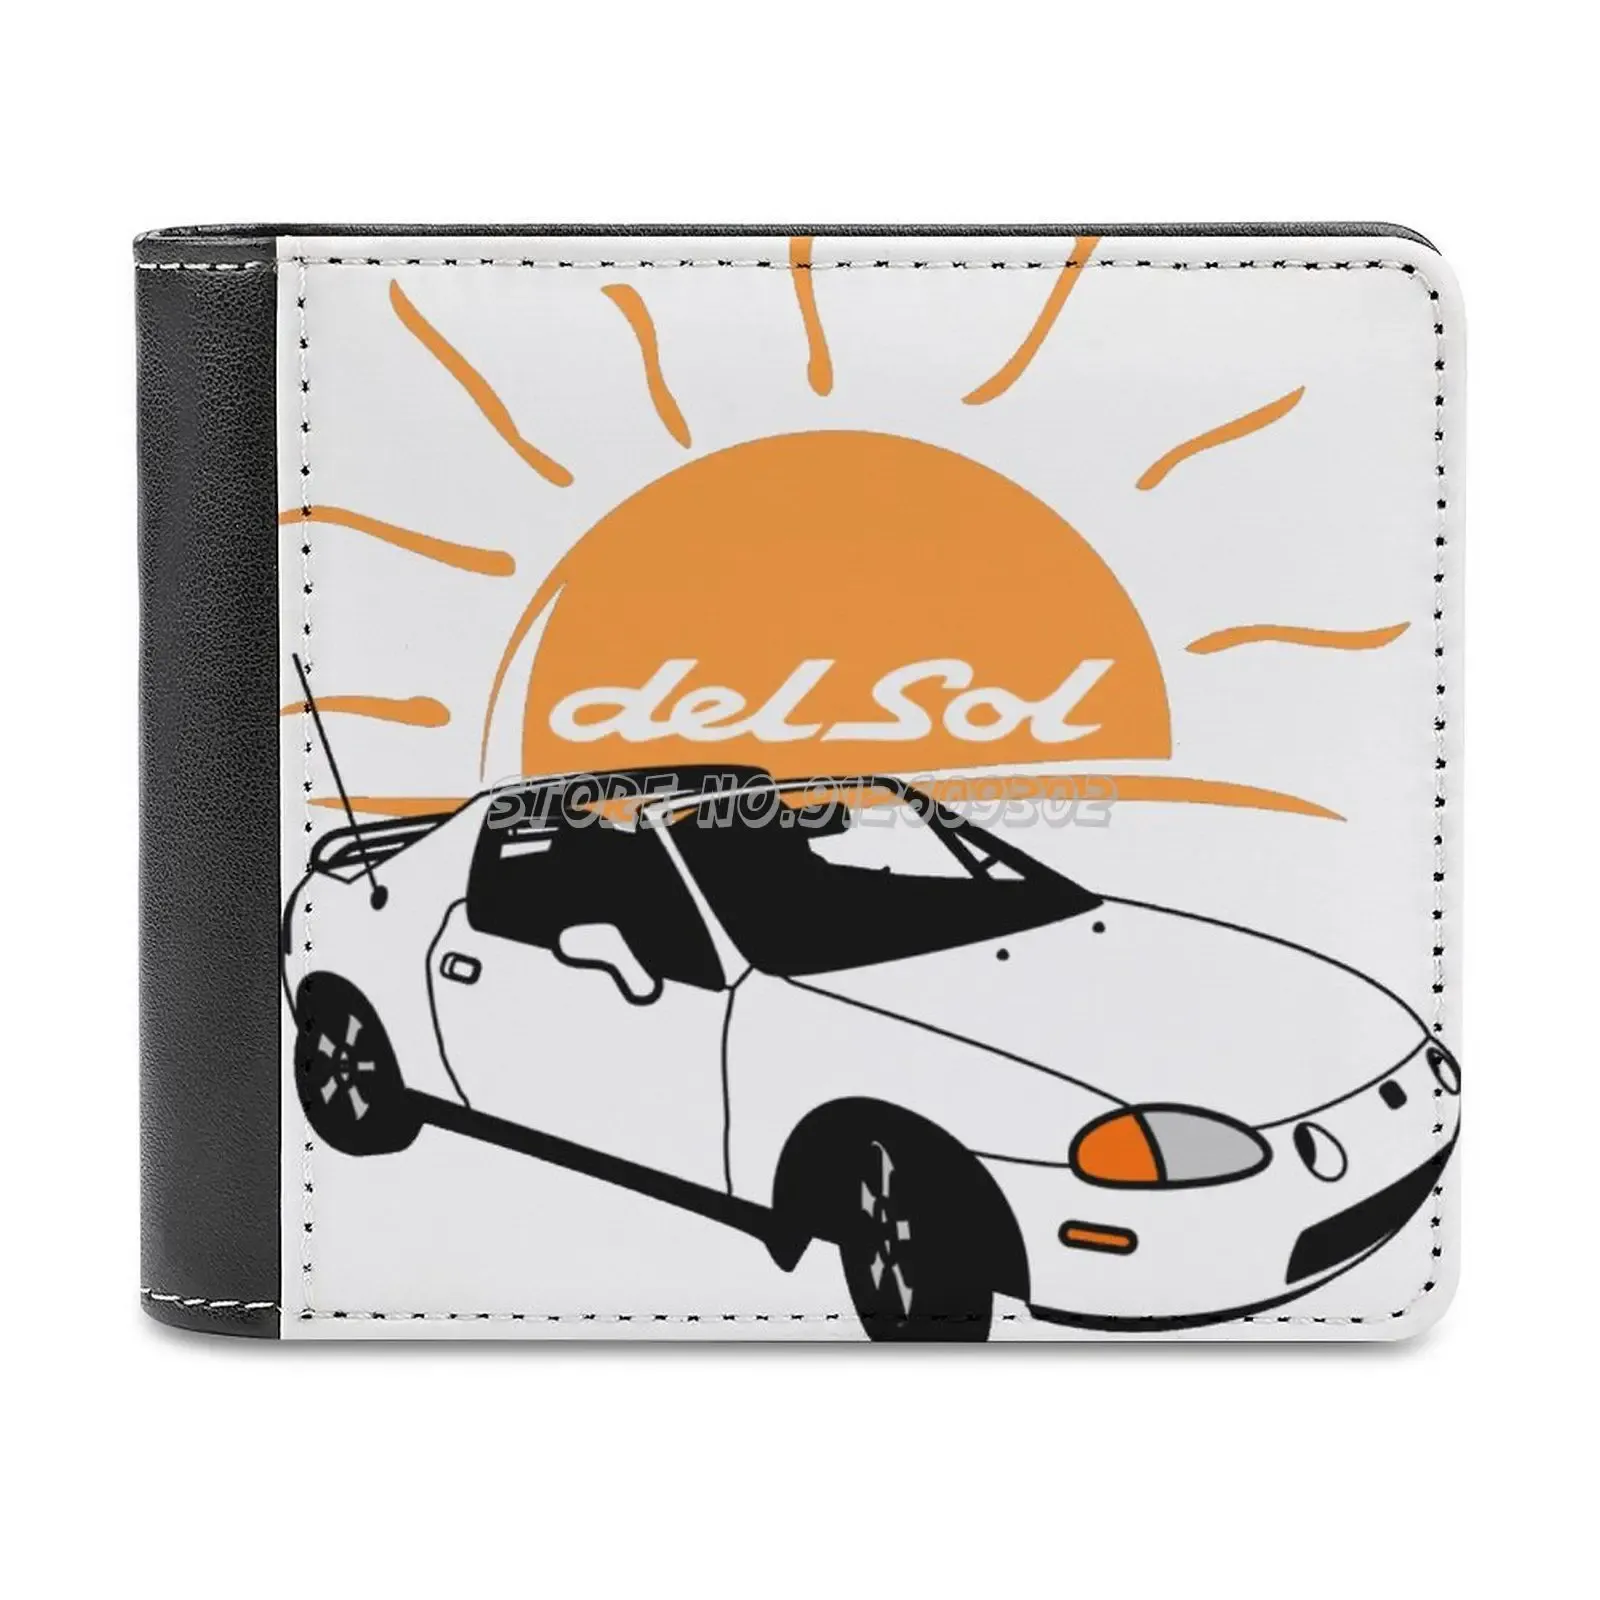 Clips Del Sol Sports Car Leather Wallet Men's Wallet Diy Personalized Purse Father's Day Gift Del Sol Del Sol Car Sports Convertible